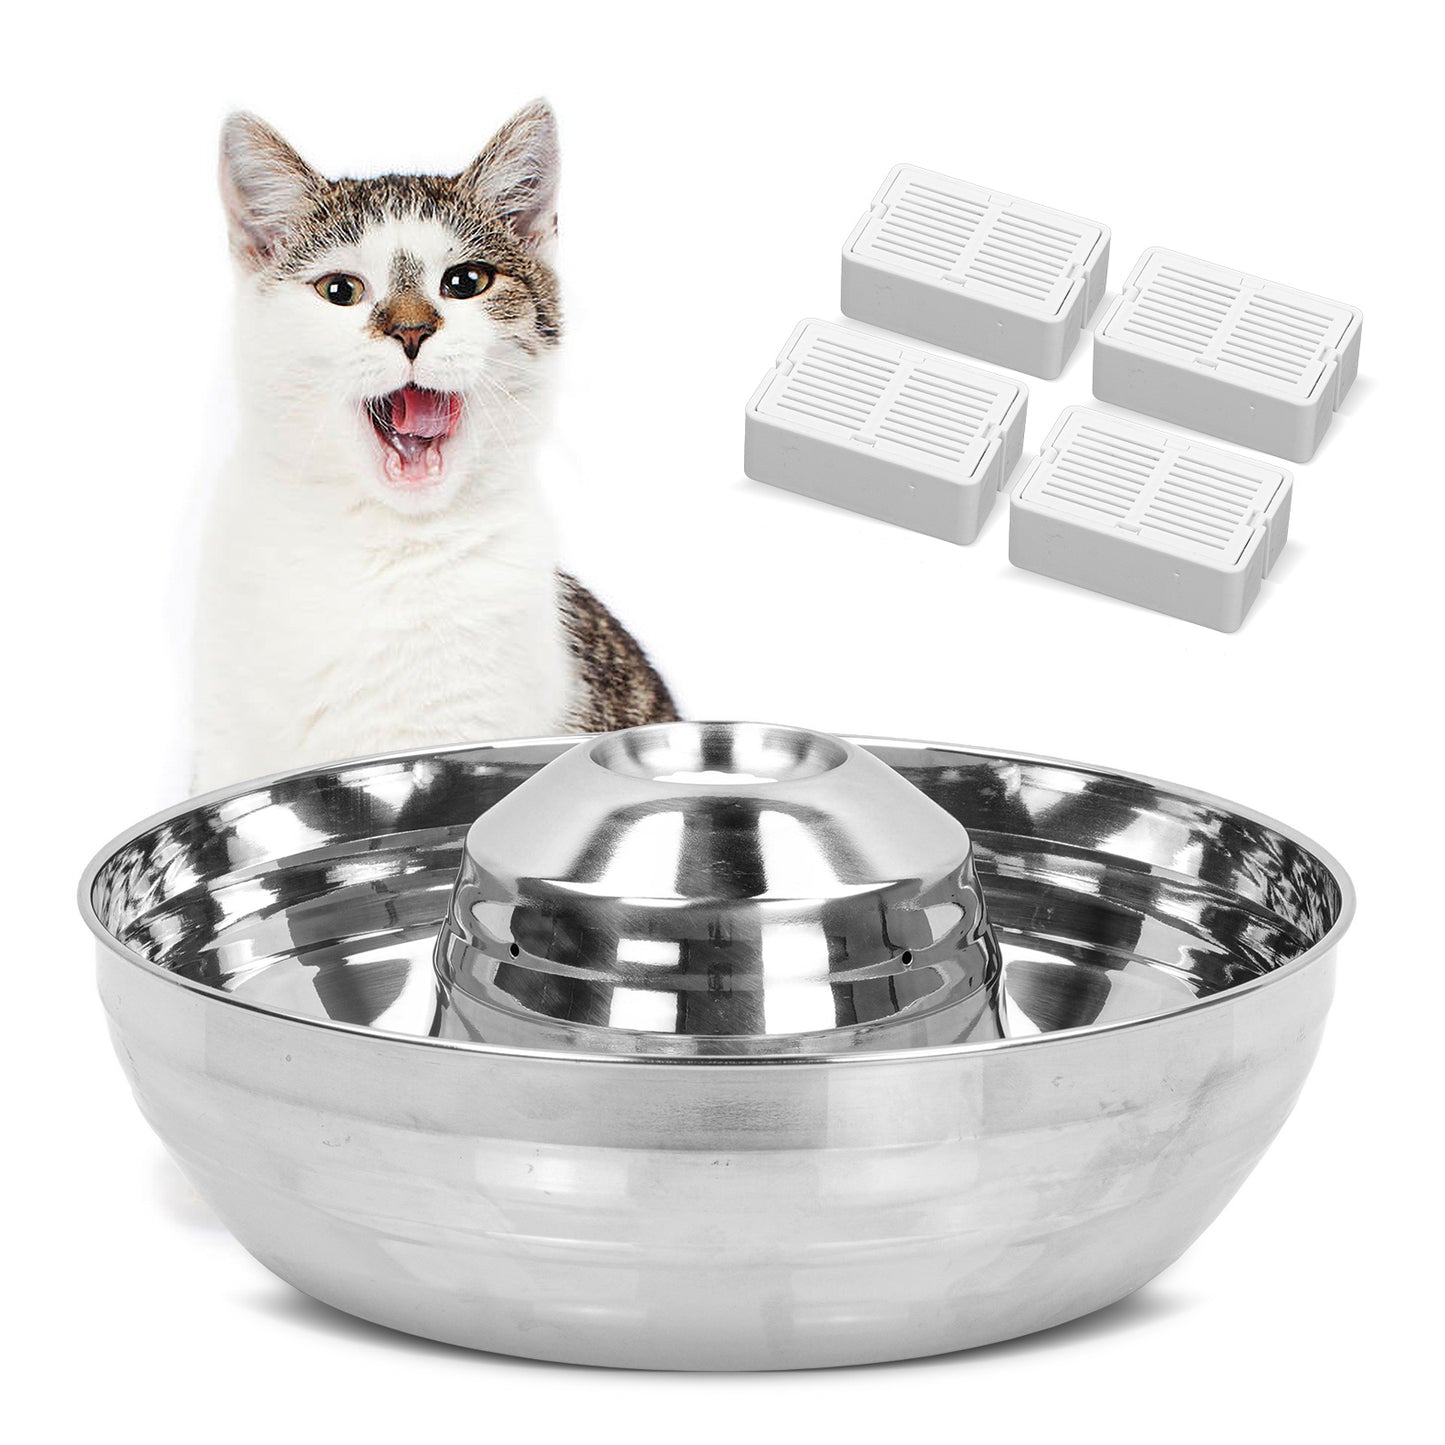 BNISE Cat Water Fountain Stainless Stee Water Drinking, Easy Assemble & Clean Pet Fountain for Dogs & Cats